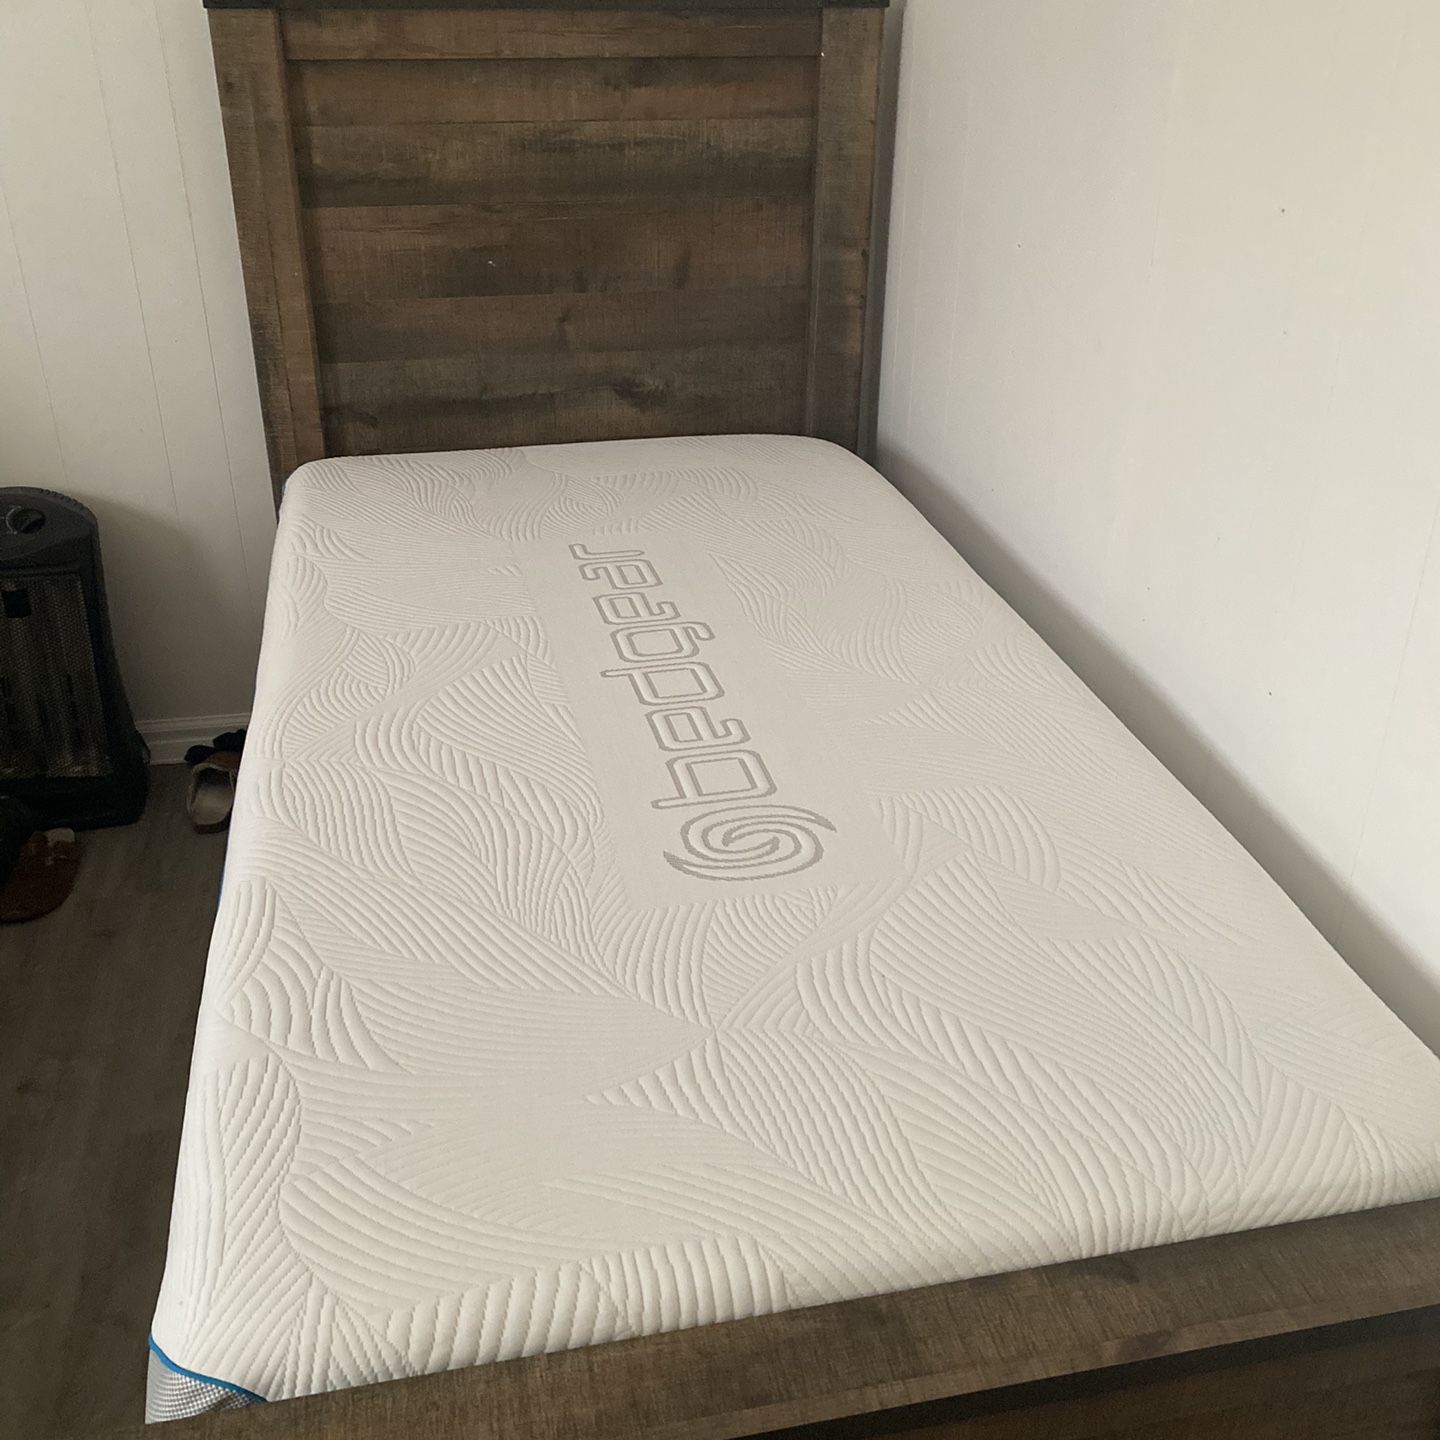 Brand new, twin size complete bed set, dresser included